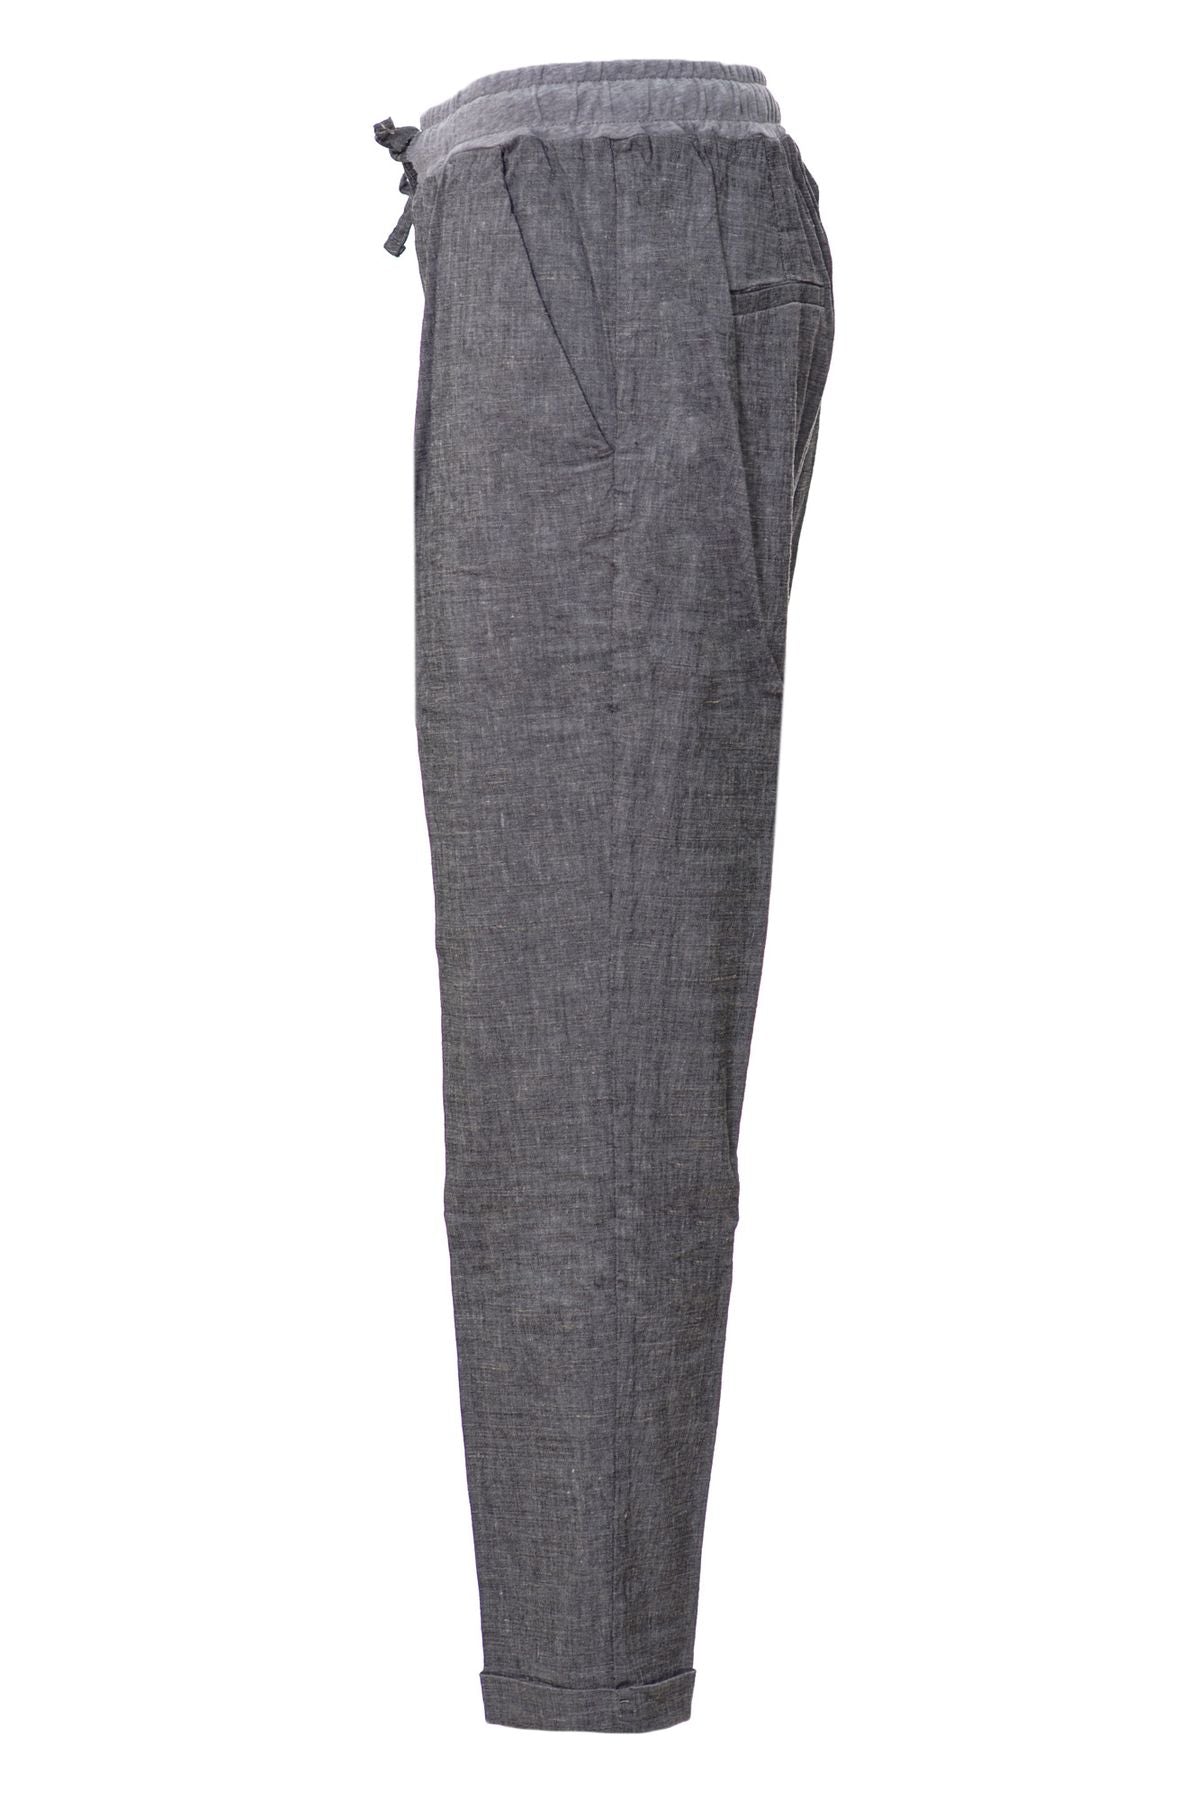 Re-HasH Spring/Summer Linen Trousers